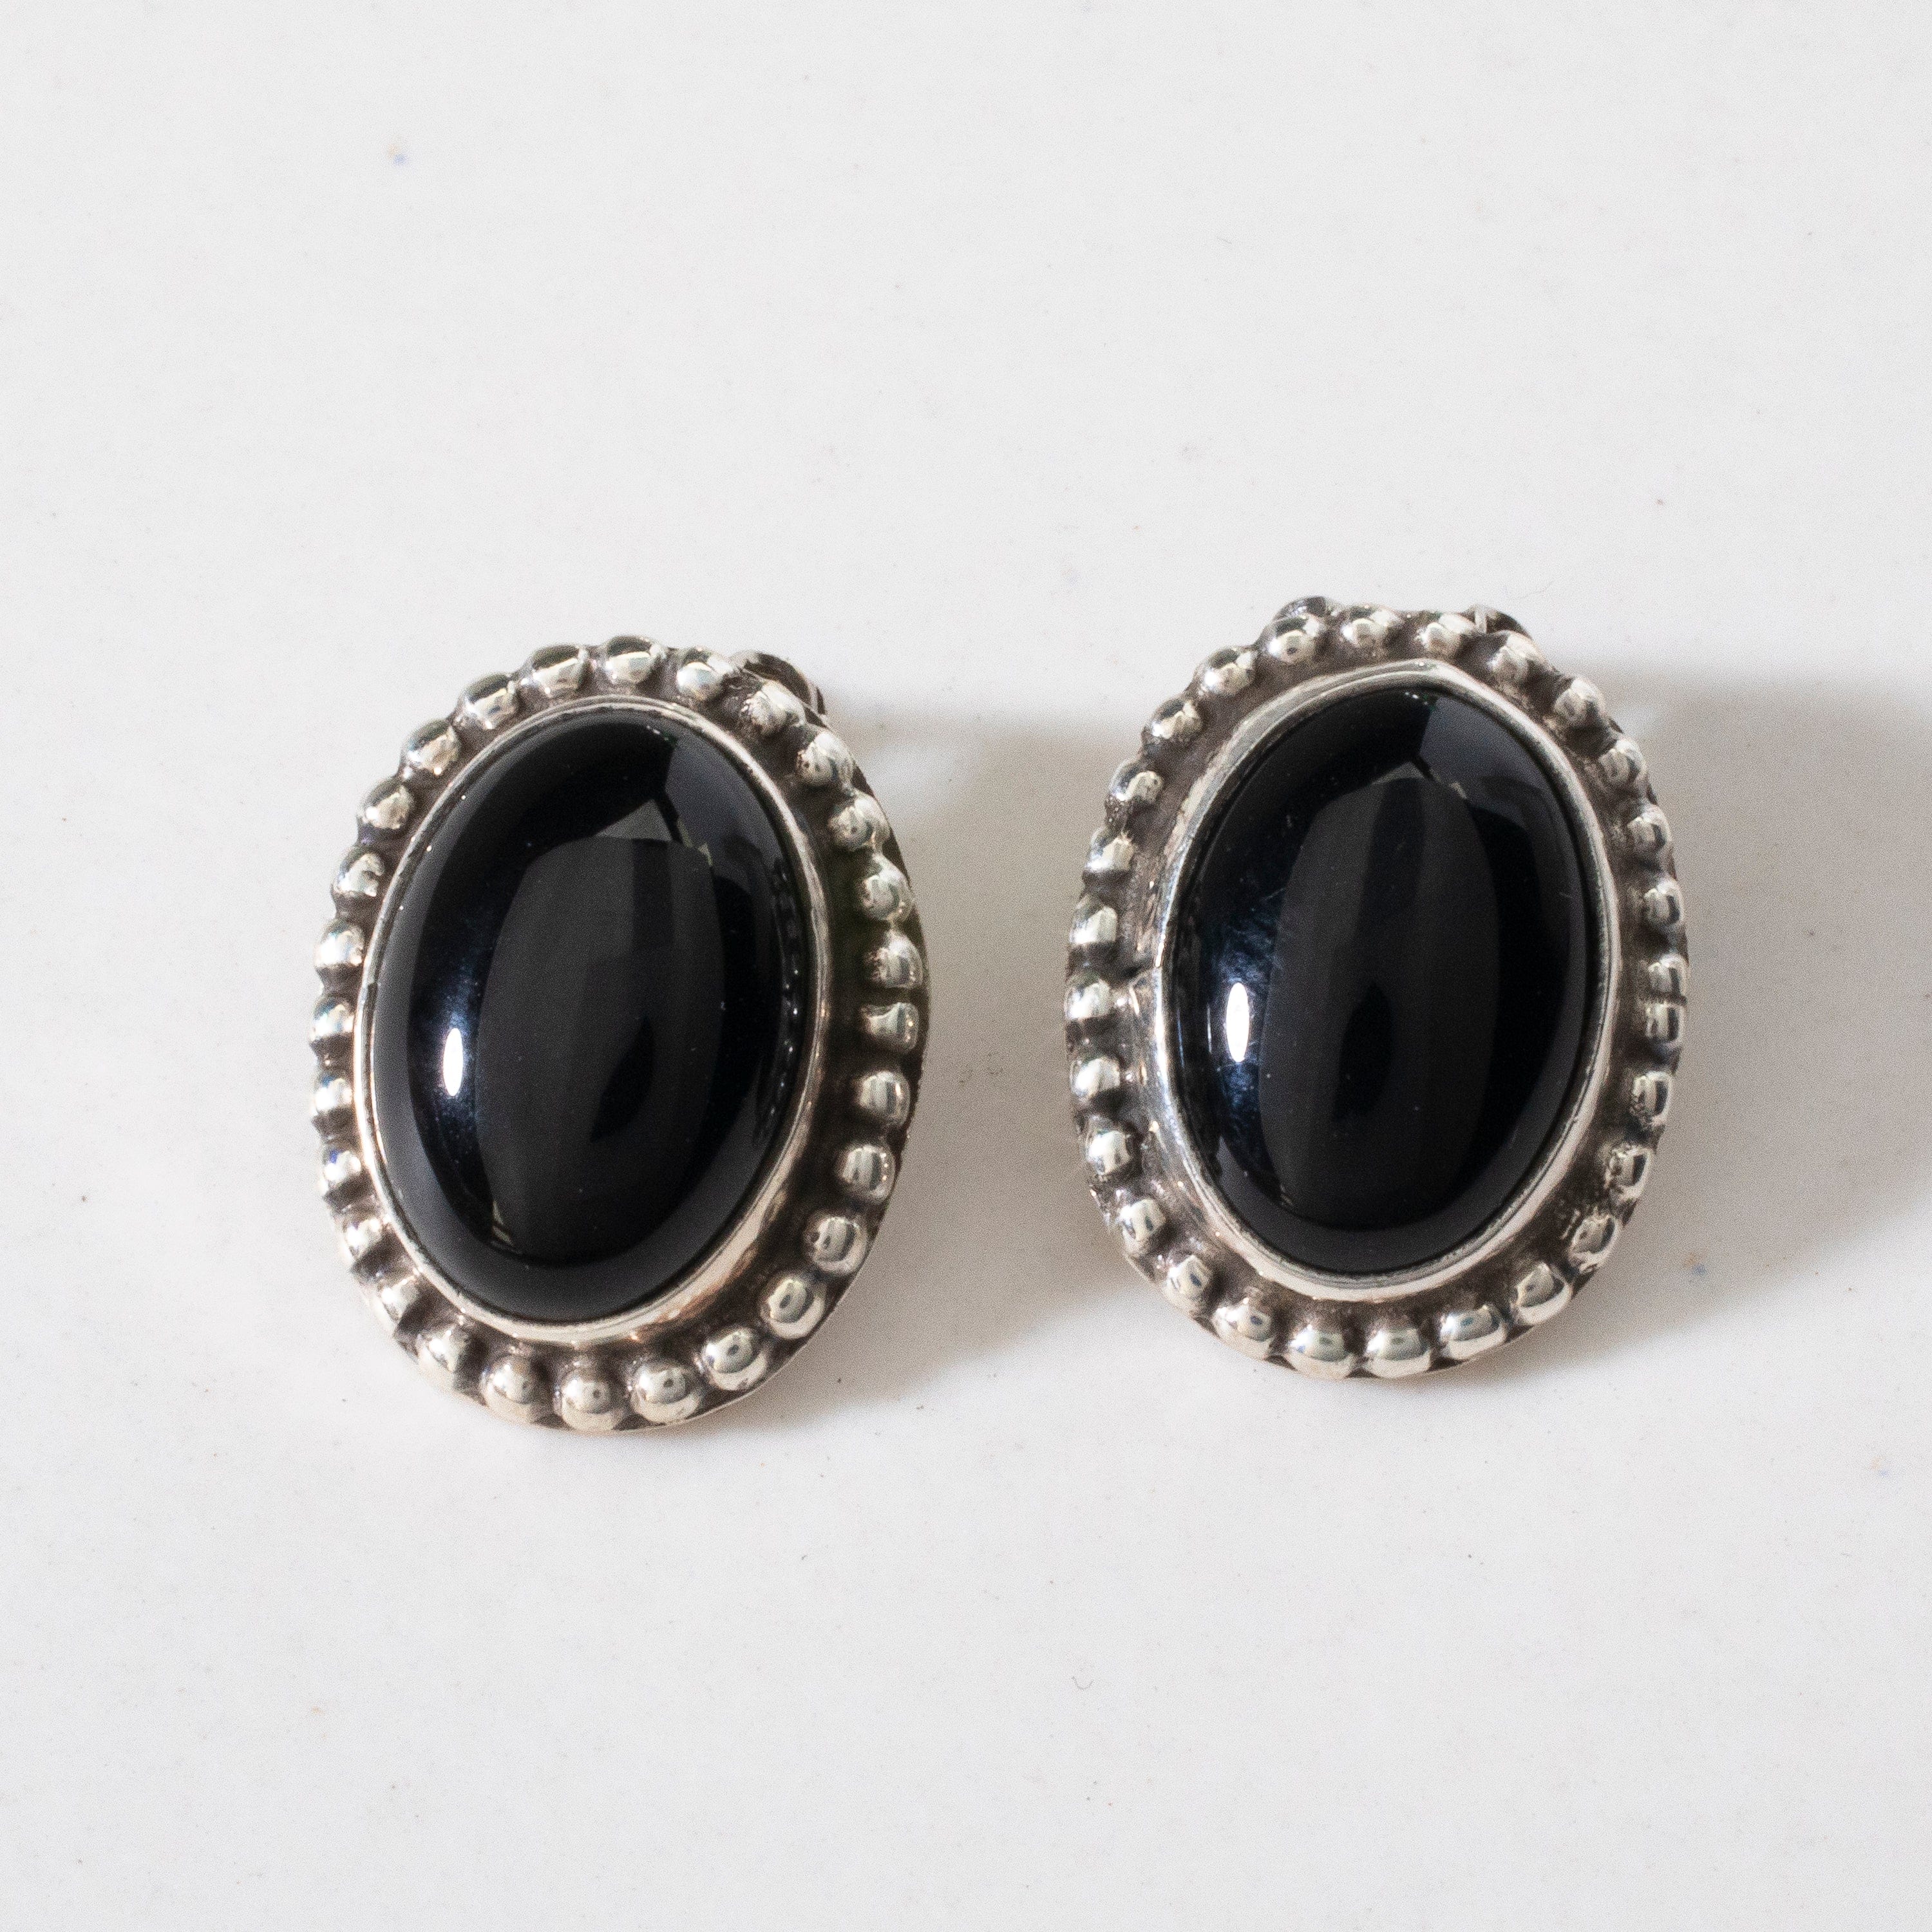 Kalifano Native American Jewelry Black Onyx Oval Navajo USA Native American Made 925 Sterling Silver Earrings with Clip On Backing NAE180.001